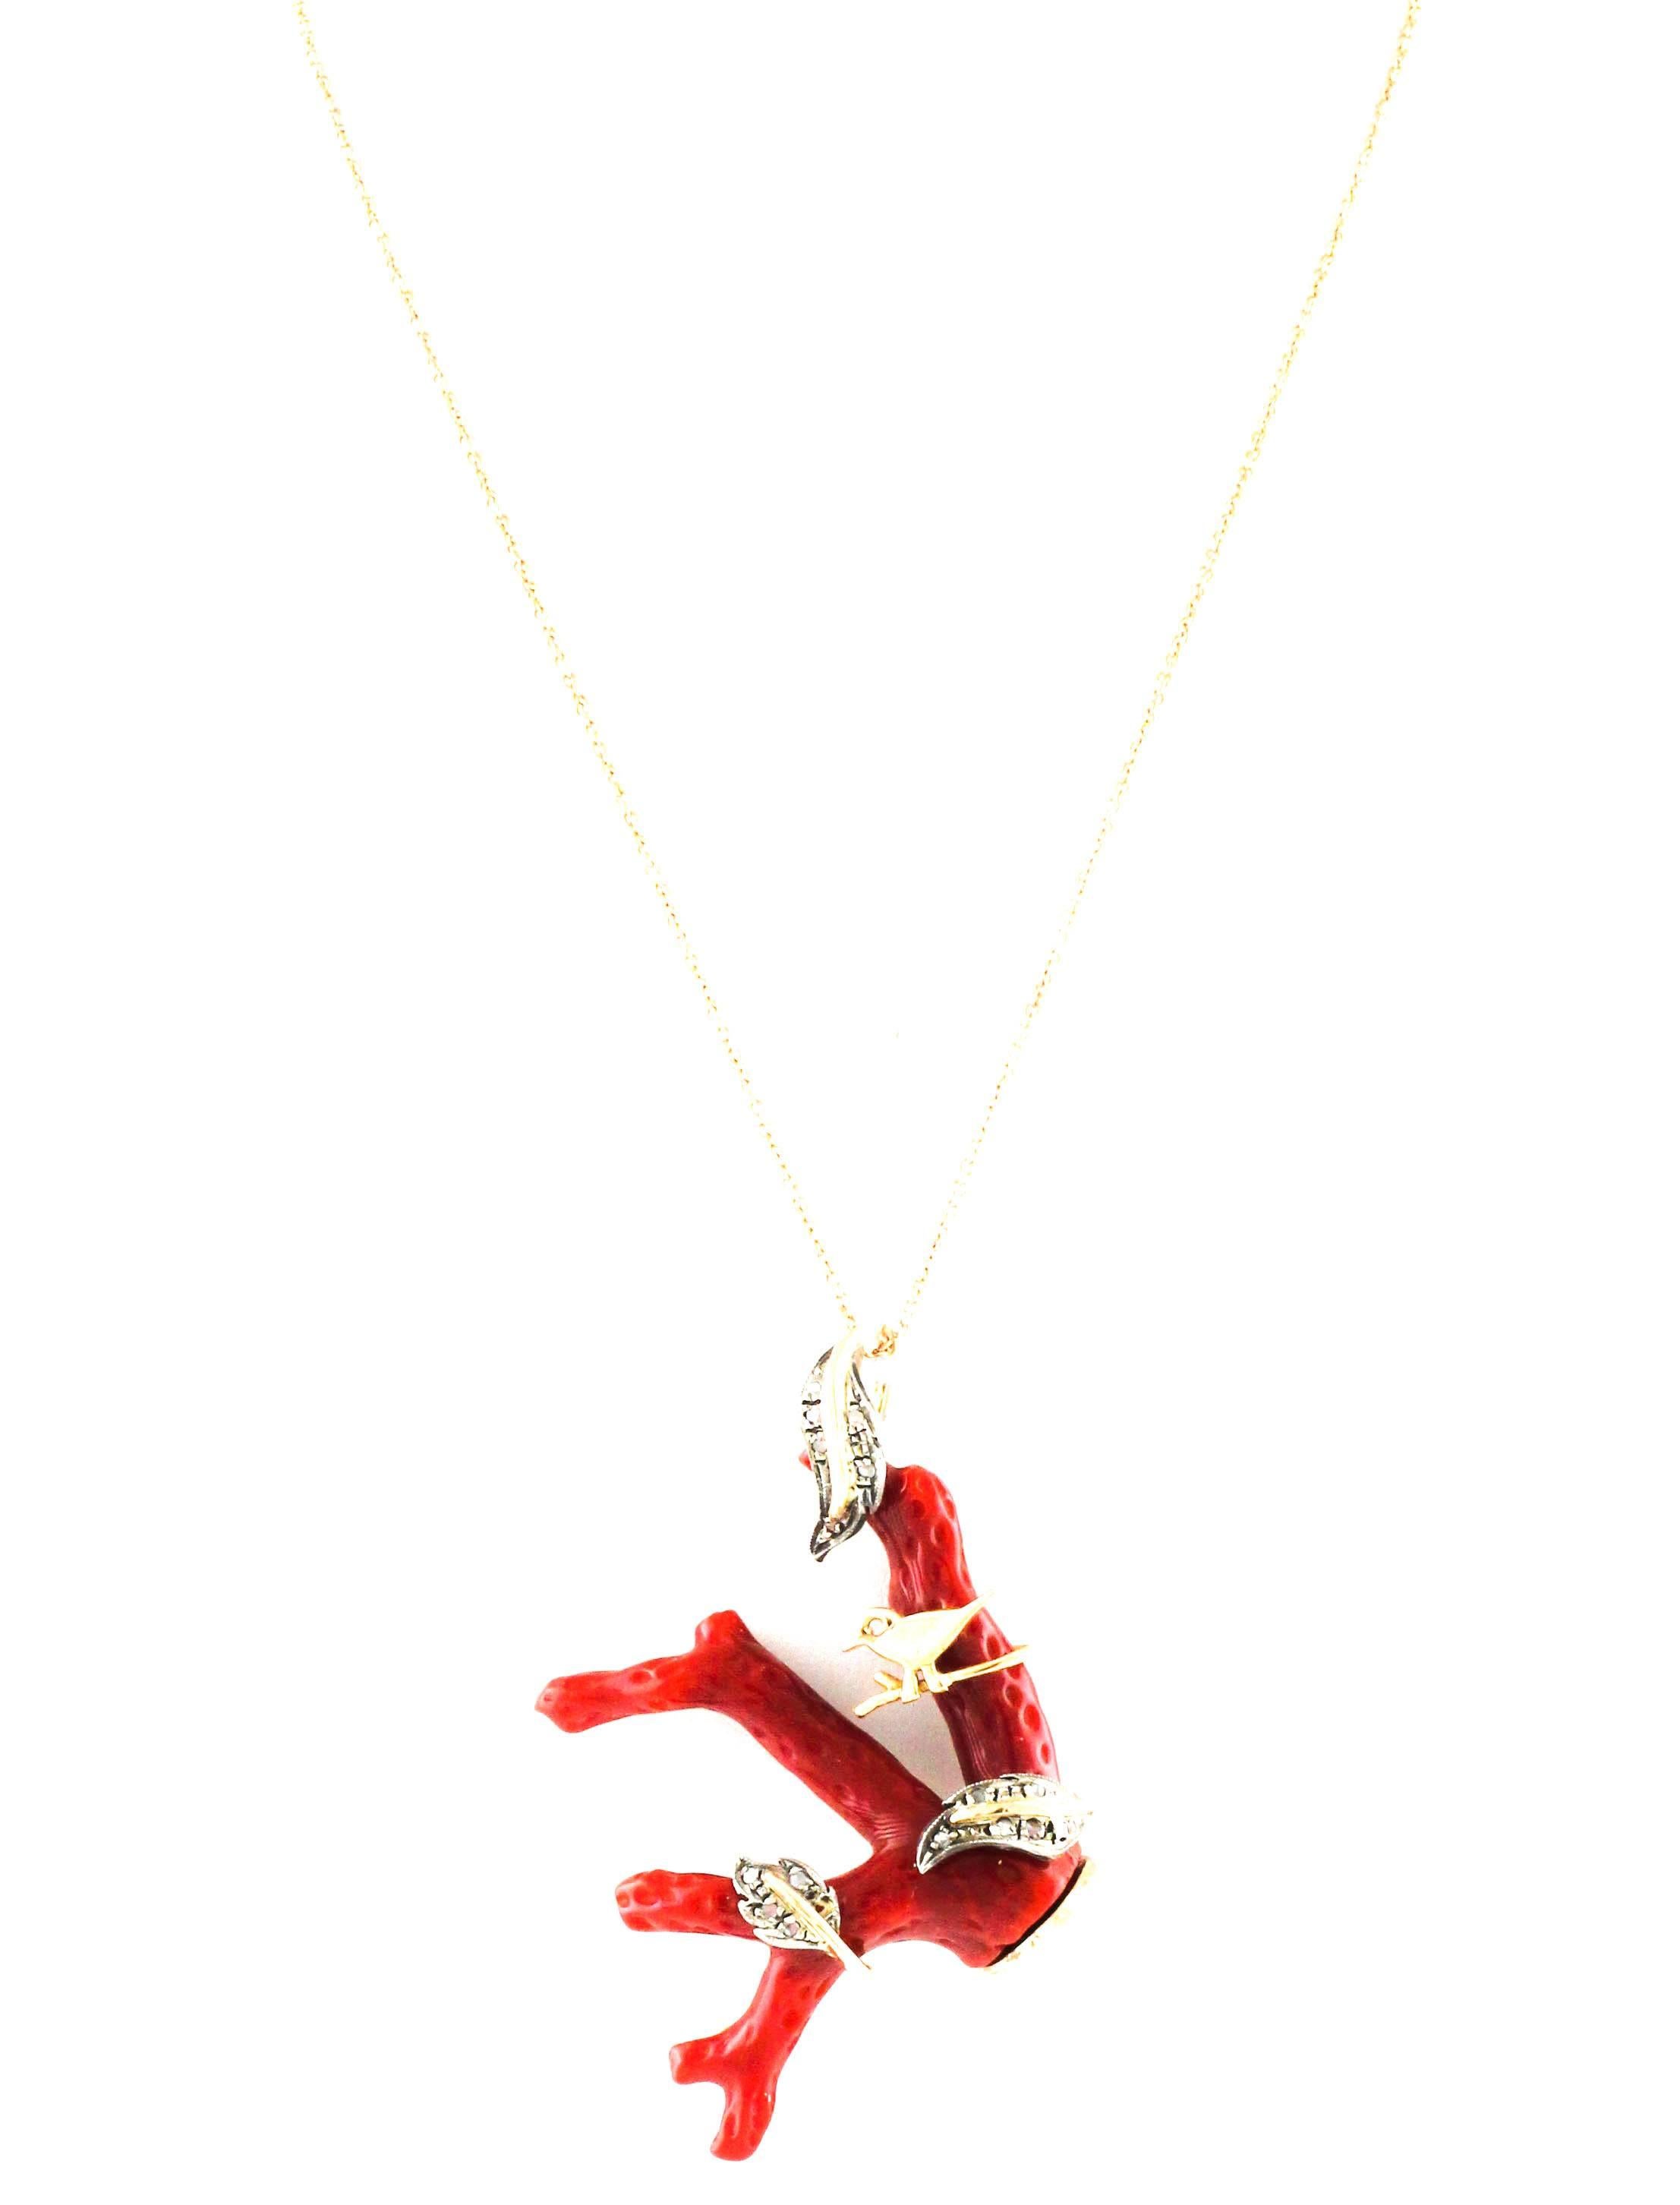 SHIPPING POLICY:
No additional costs will be added to this order.
Shipping costs will be totally covered by the seller (customs duties included).

Beautiful Italian coral (6.5 g) pendant in the shape of a branch surrounded by leaves, a little bird,